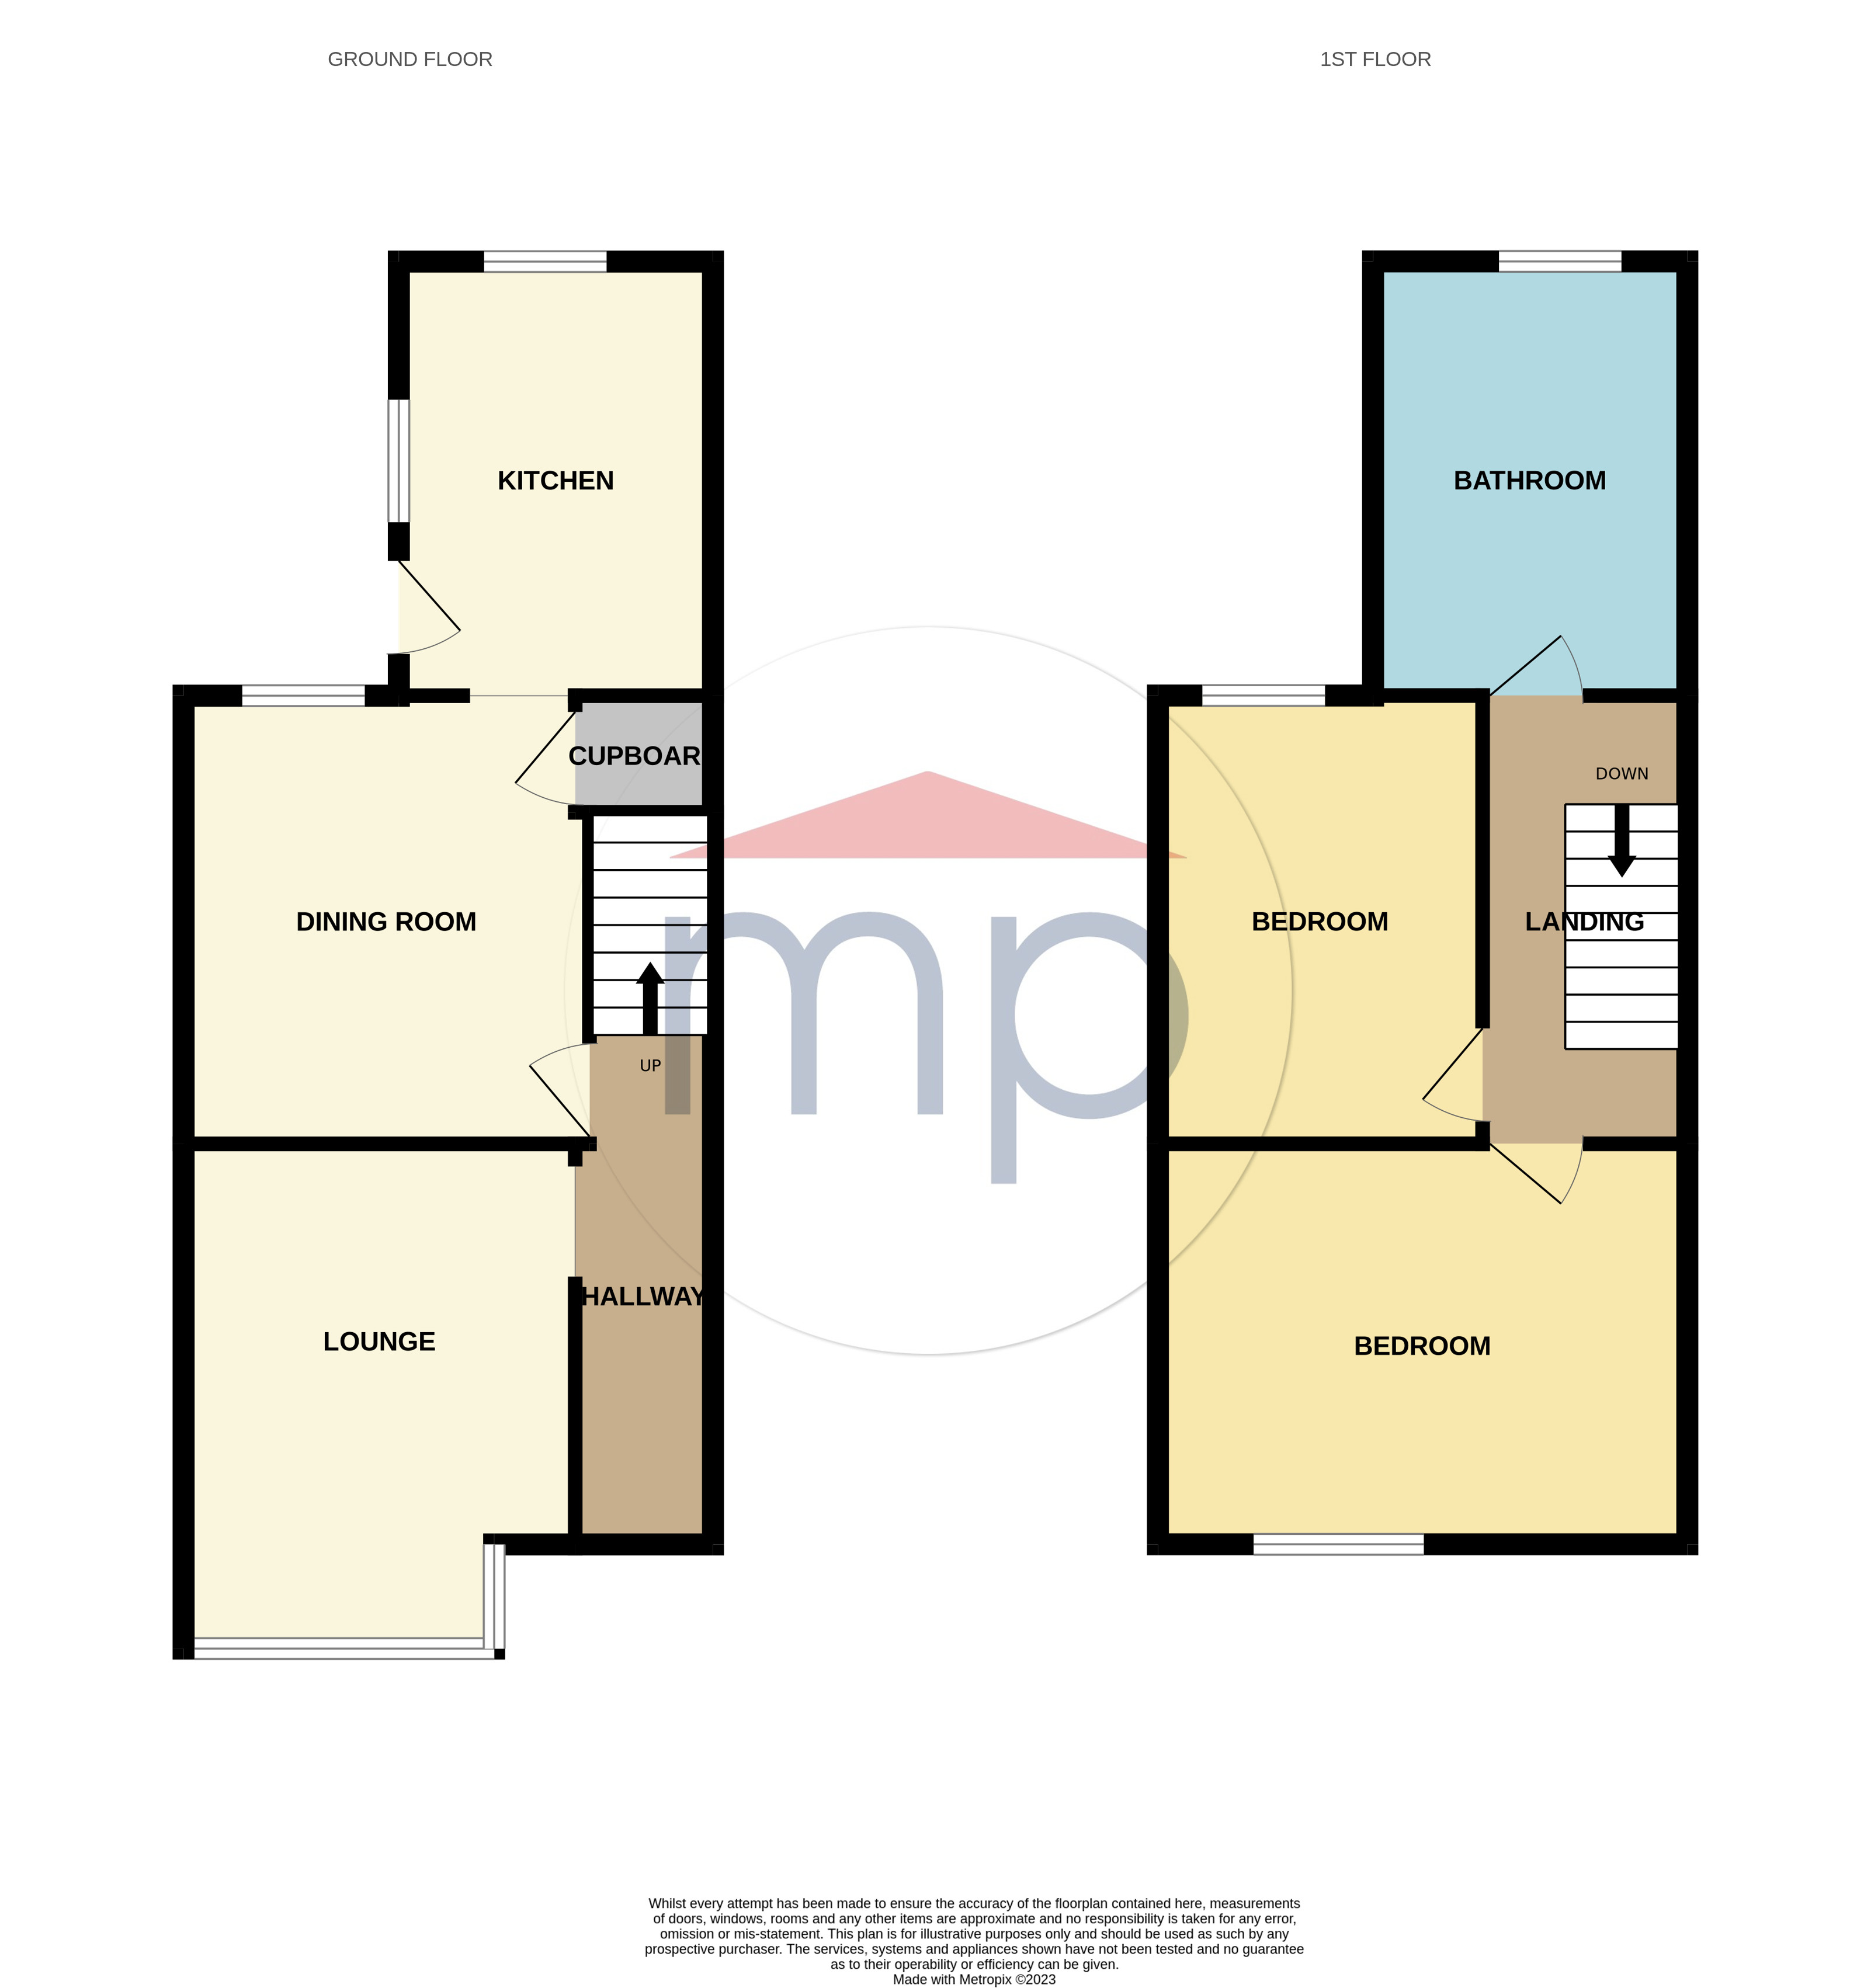 2 bed house for sale - Property floorplan